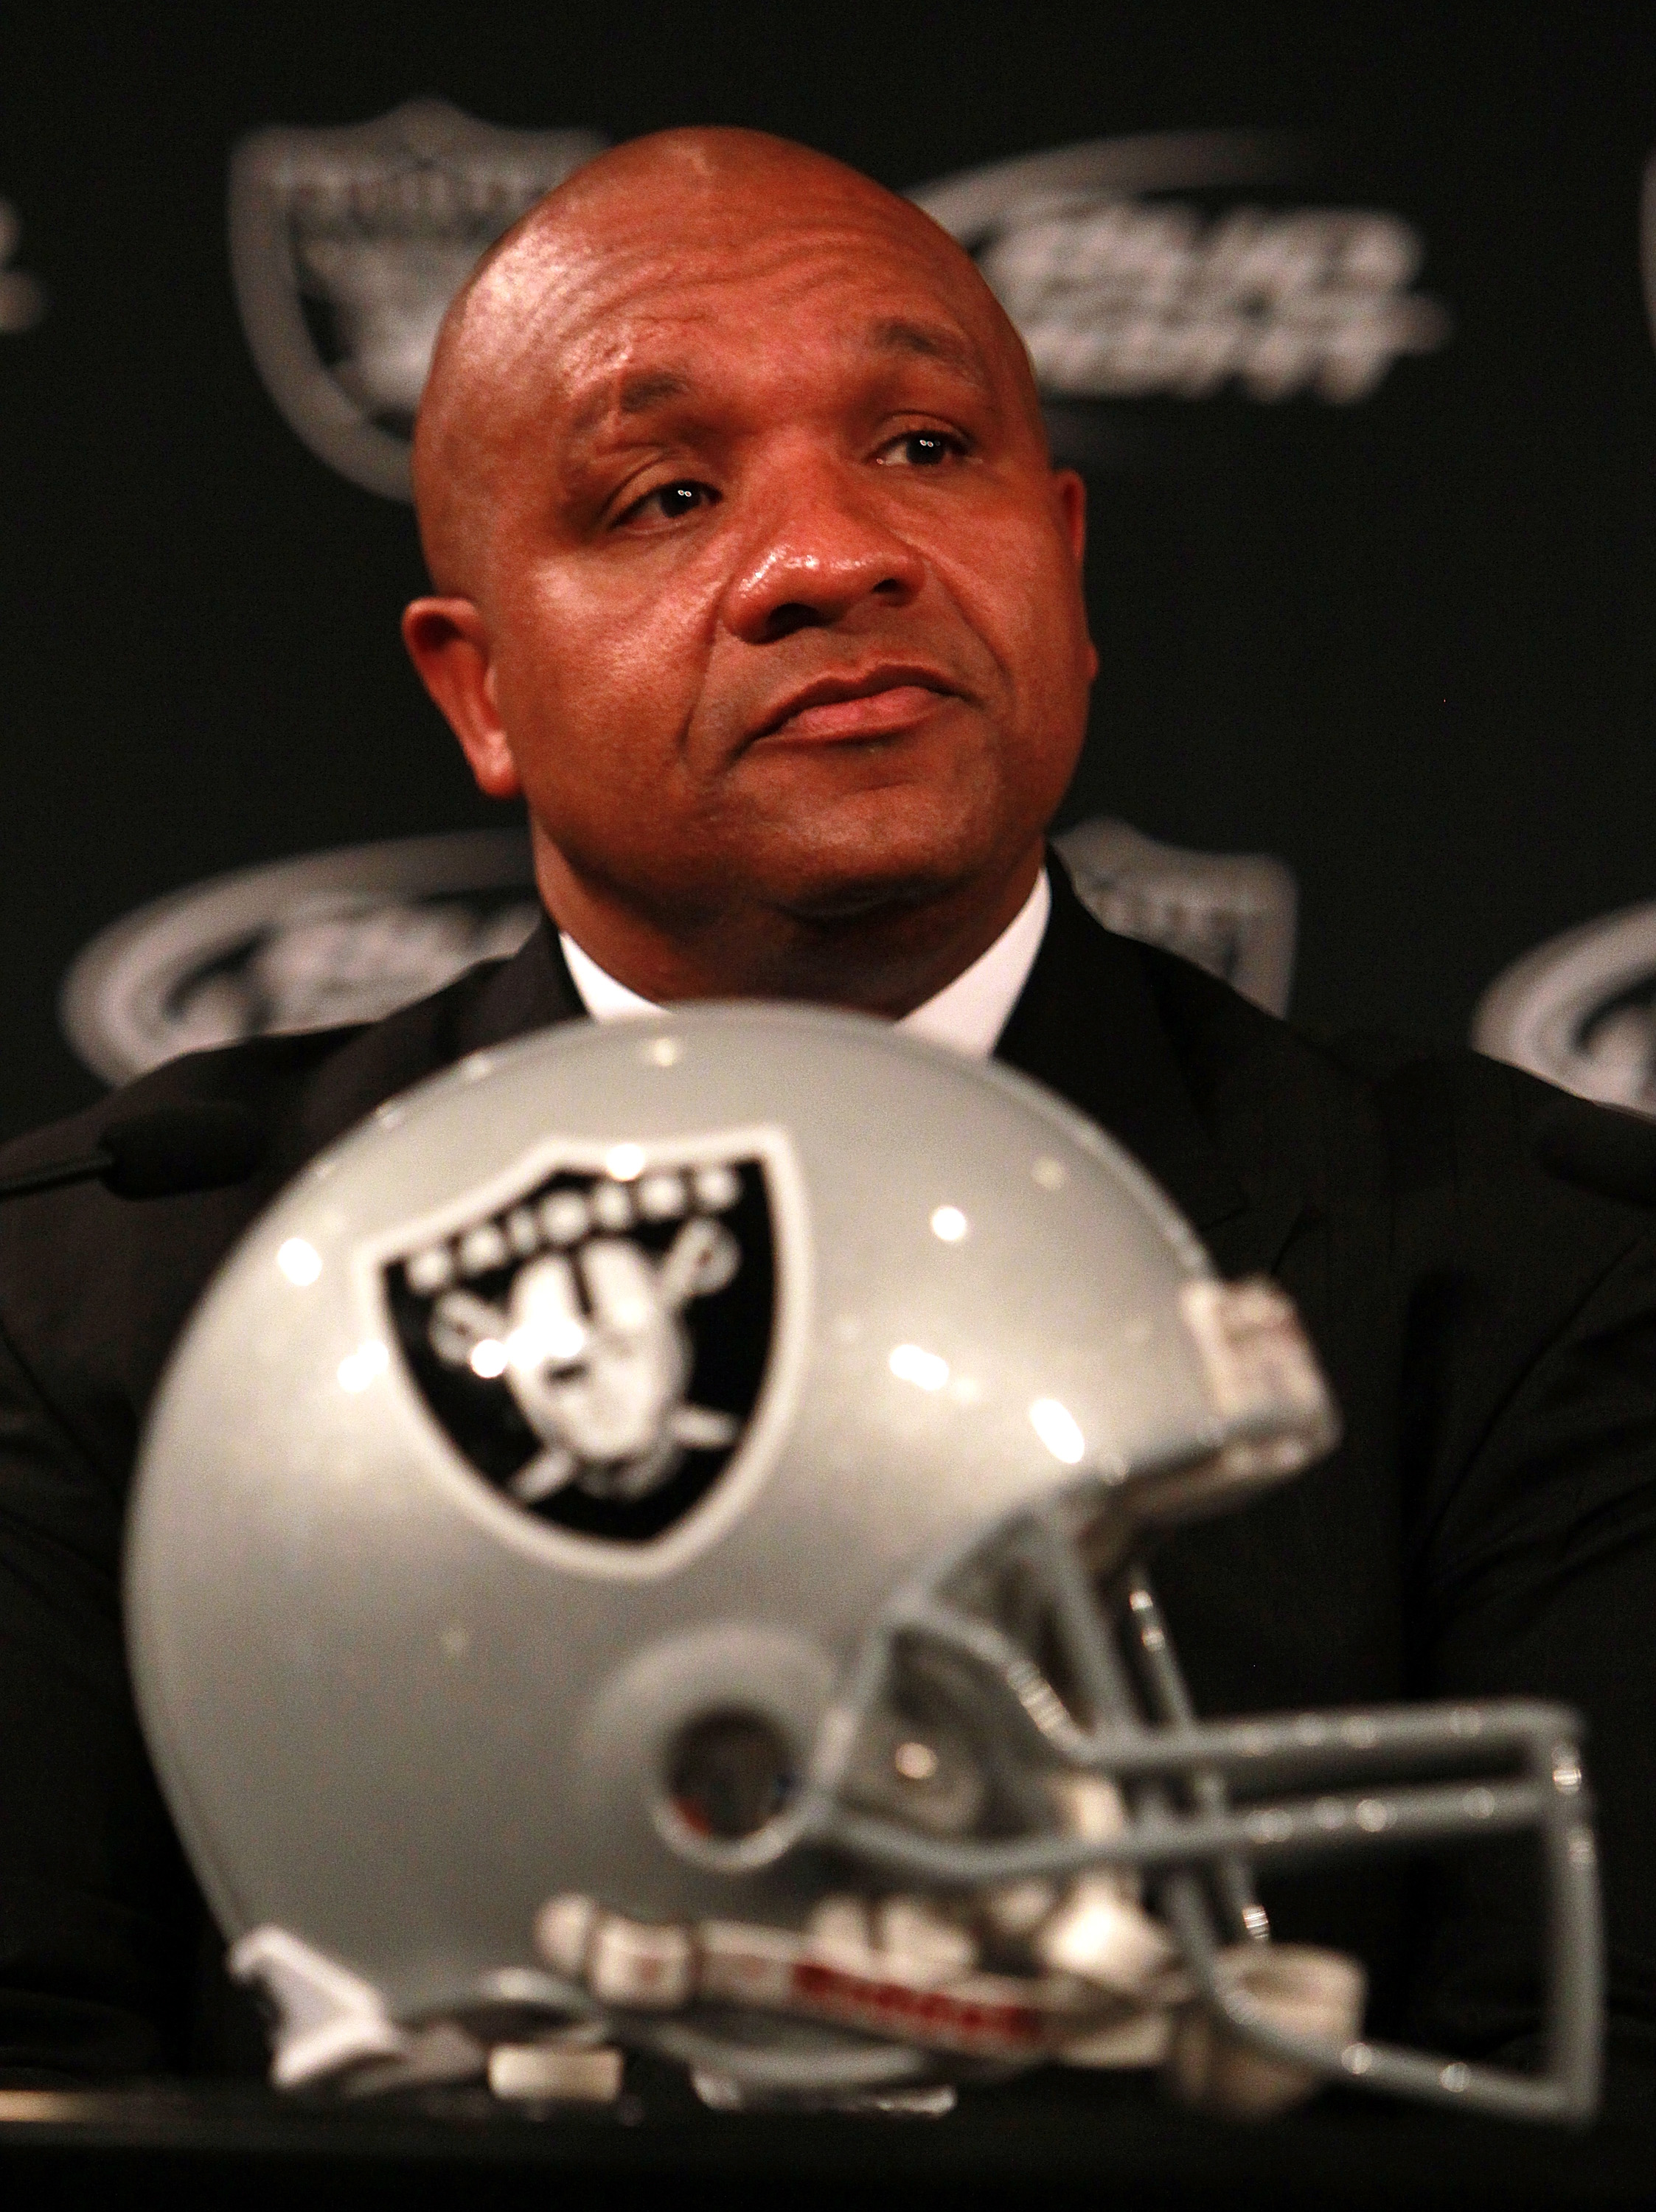 ALAMEDA, CA - JANUARY 18:  New Oakland Raiders coach Hue Jackson looks on during a press conference on January 18, 2011 in Alameda, California.  Hue Jackson was introduced as the new coach of the Oakland Raiders, replacing the fired Tom Cable.  (Photo by